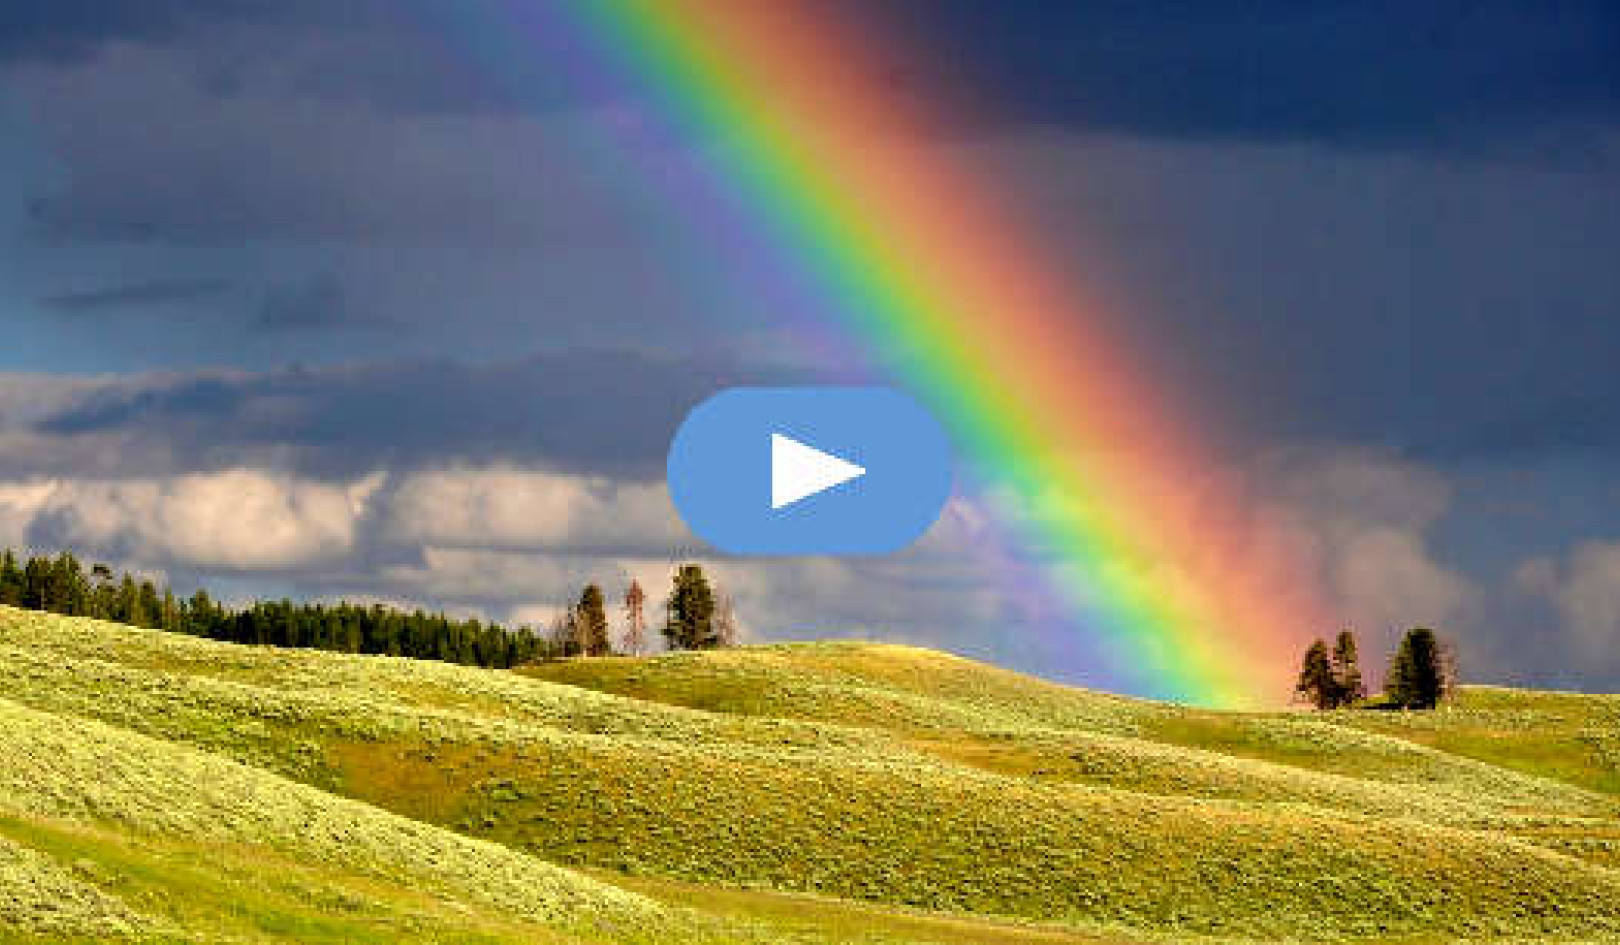 Give Yourself Time, Be Kind, and Heal in Your Own Way (Video)